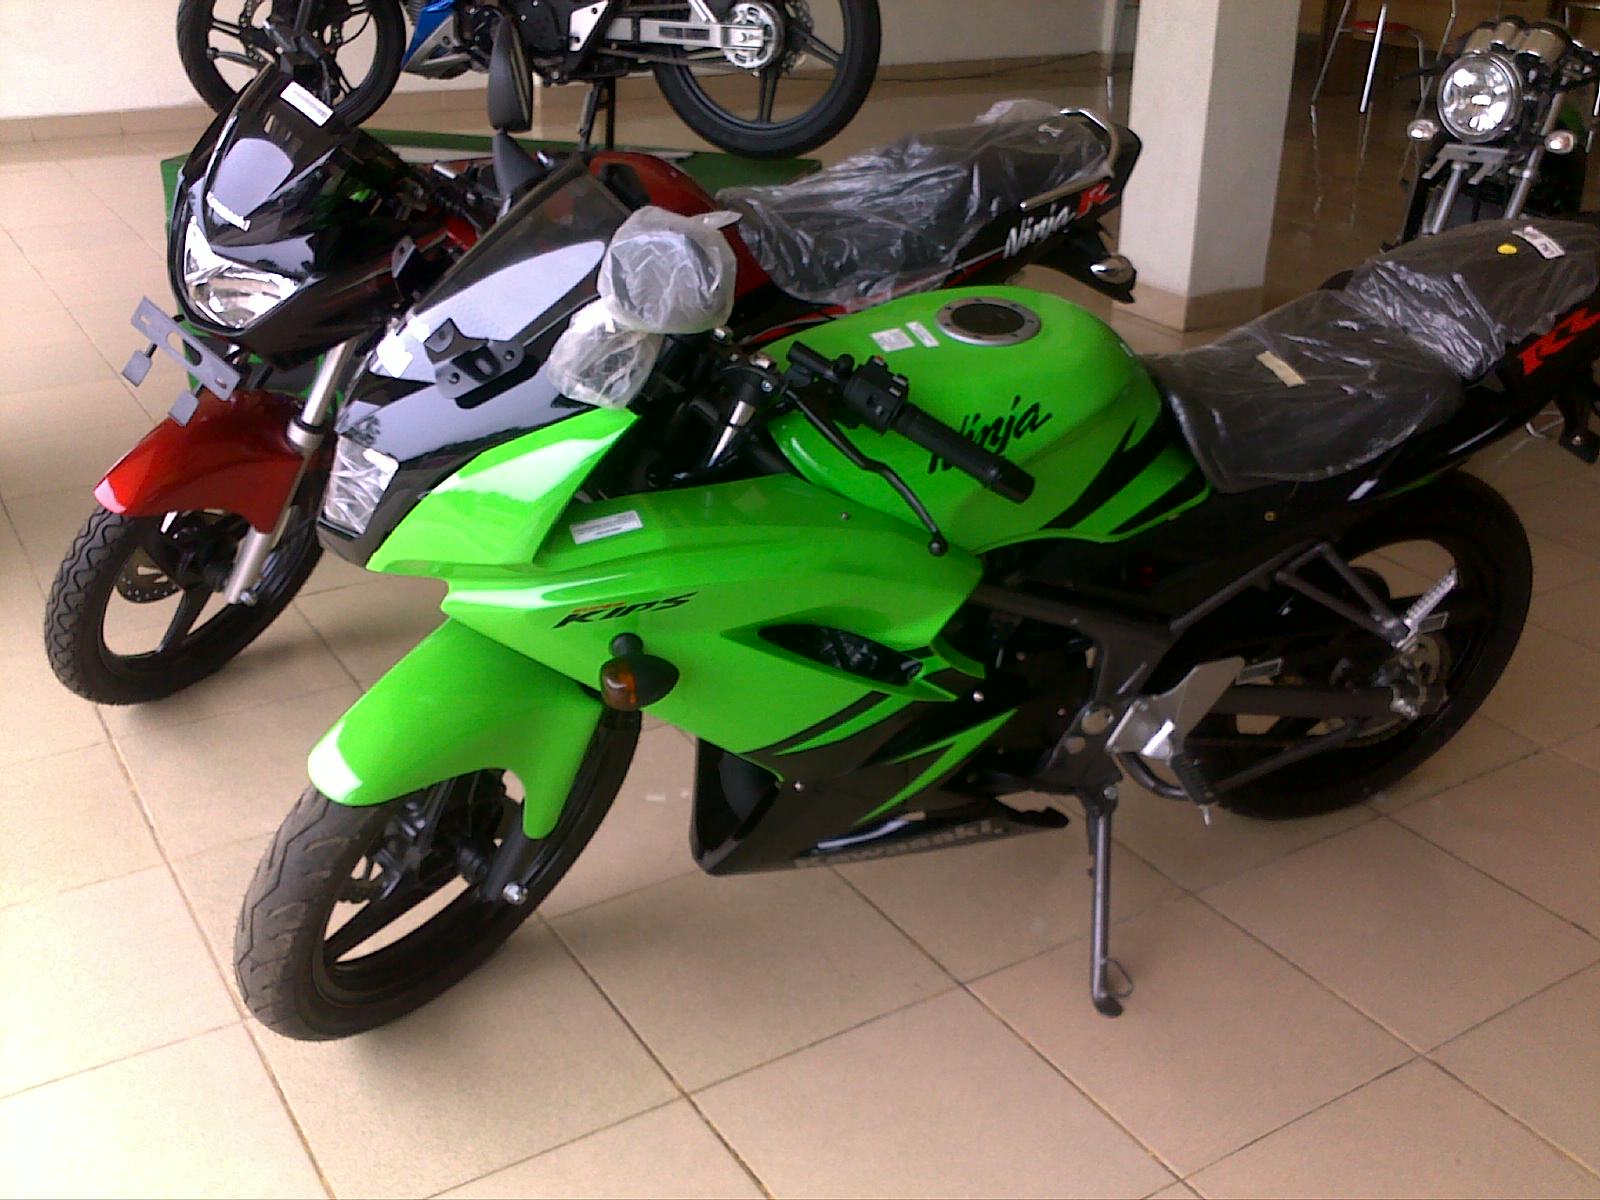 What You Interested About Motorcycle Ninja 150cc Other Nice Design